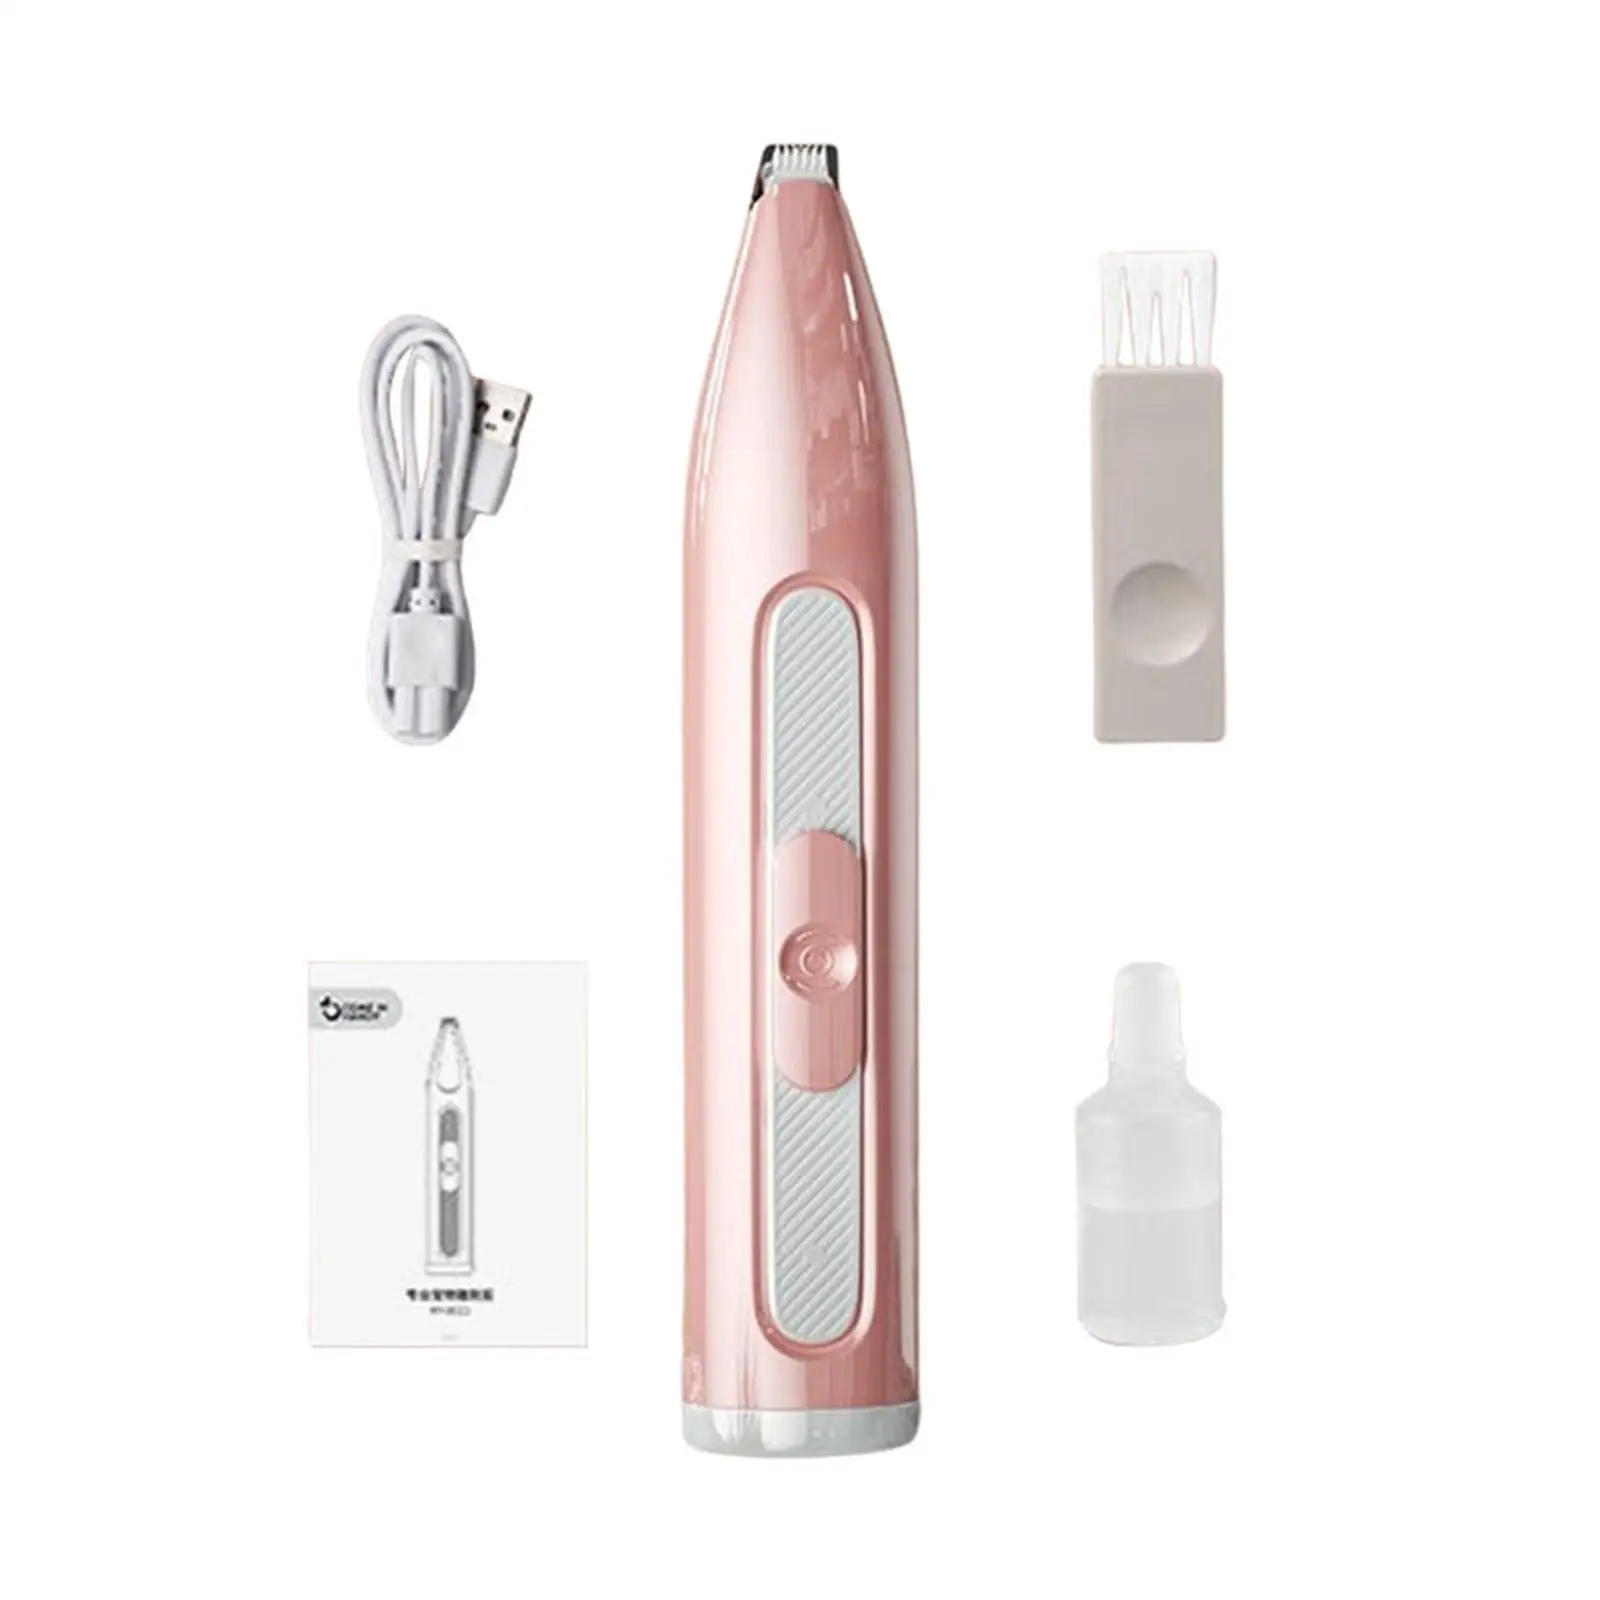 Portable Pet Nail Hair Trimmer Dog Hair Clippers Silent Kitten Cordless Puppy for Small Animals Toes Paw Rump Trimming Shaving